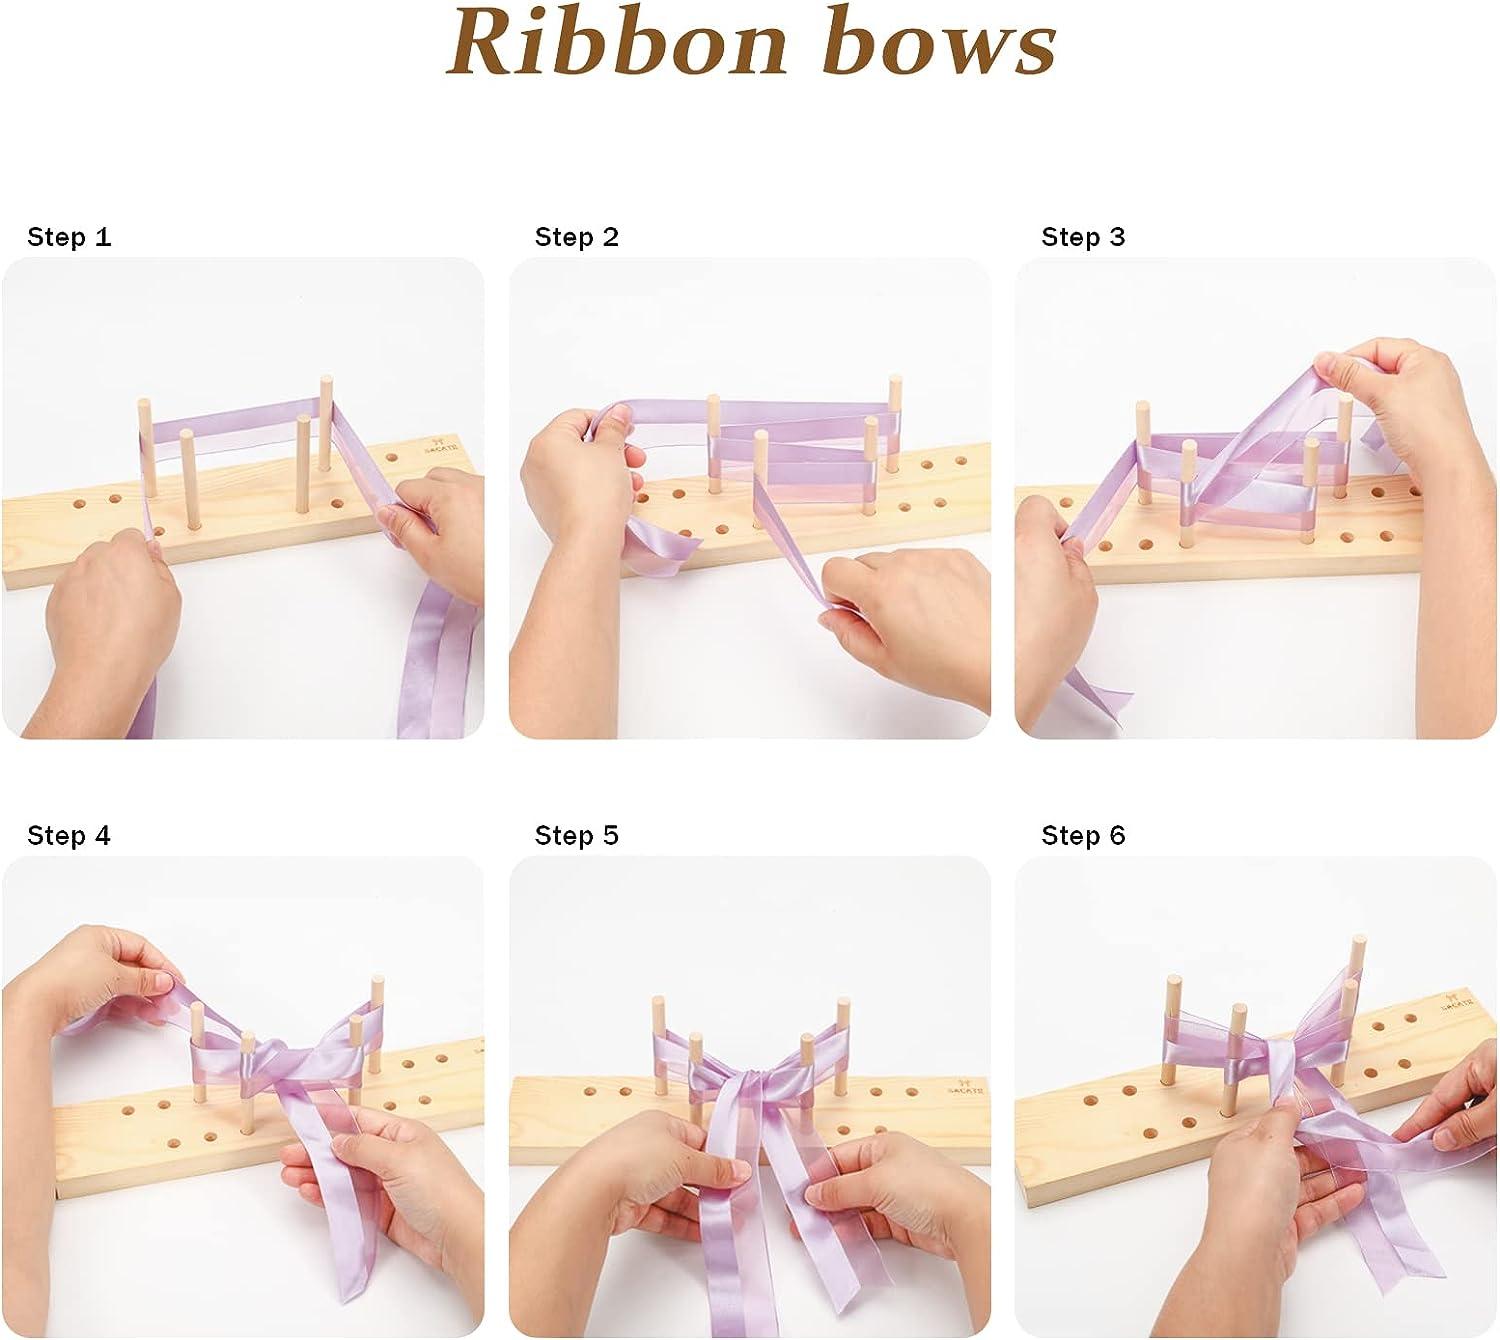 The RunnerDuck Bow Maker, step by step instructions.